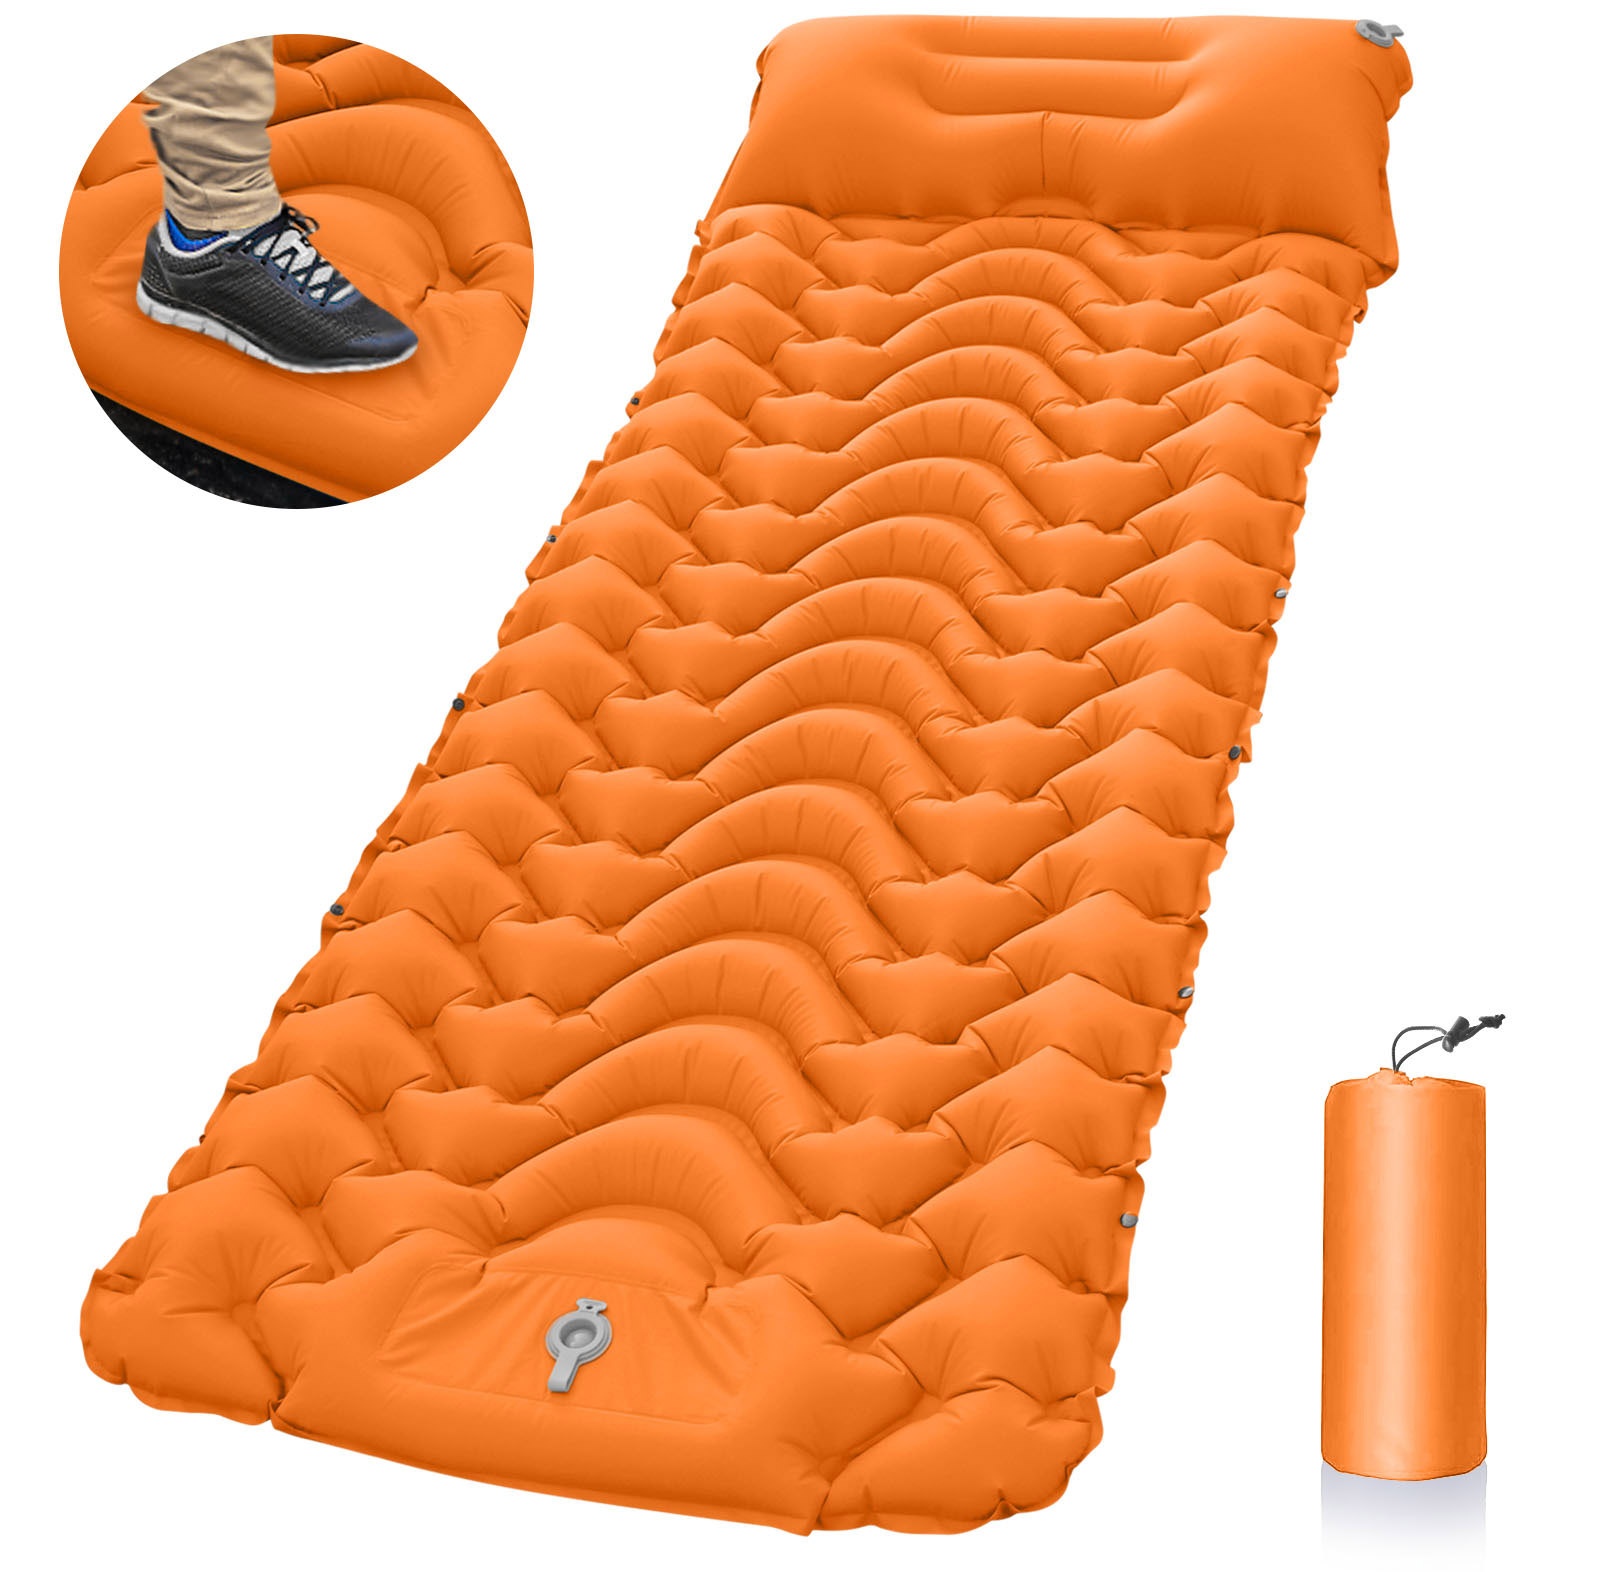 Hot Sale Outdoor 10CM Self inflating Camping Air Mat Foot Pump Press Waterproof Insulated Ultralight Sleeping Pad with Pillow